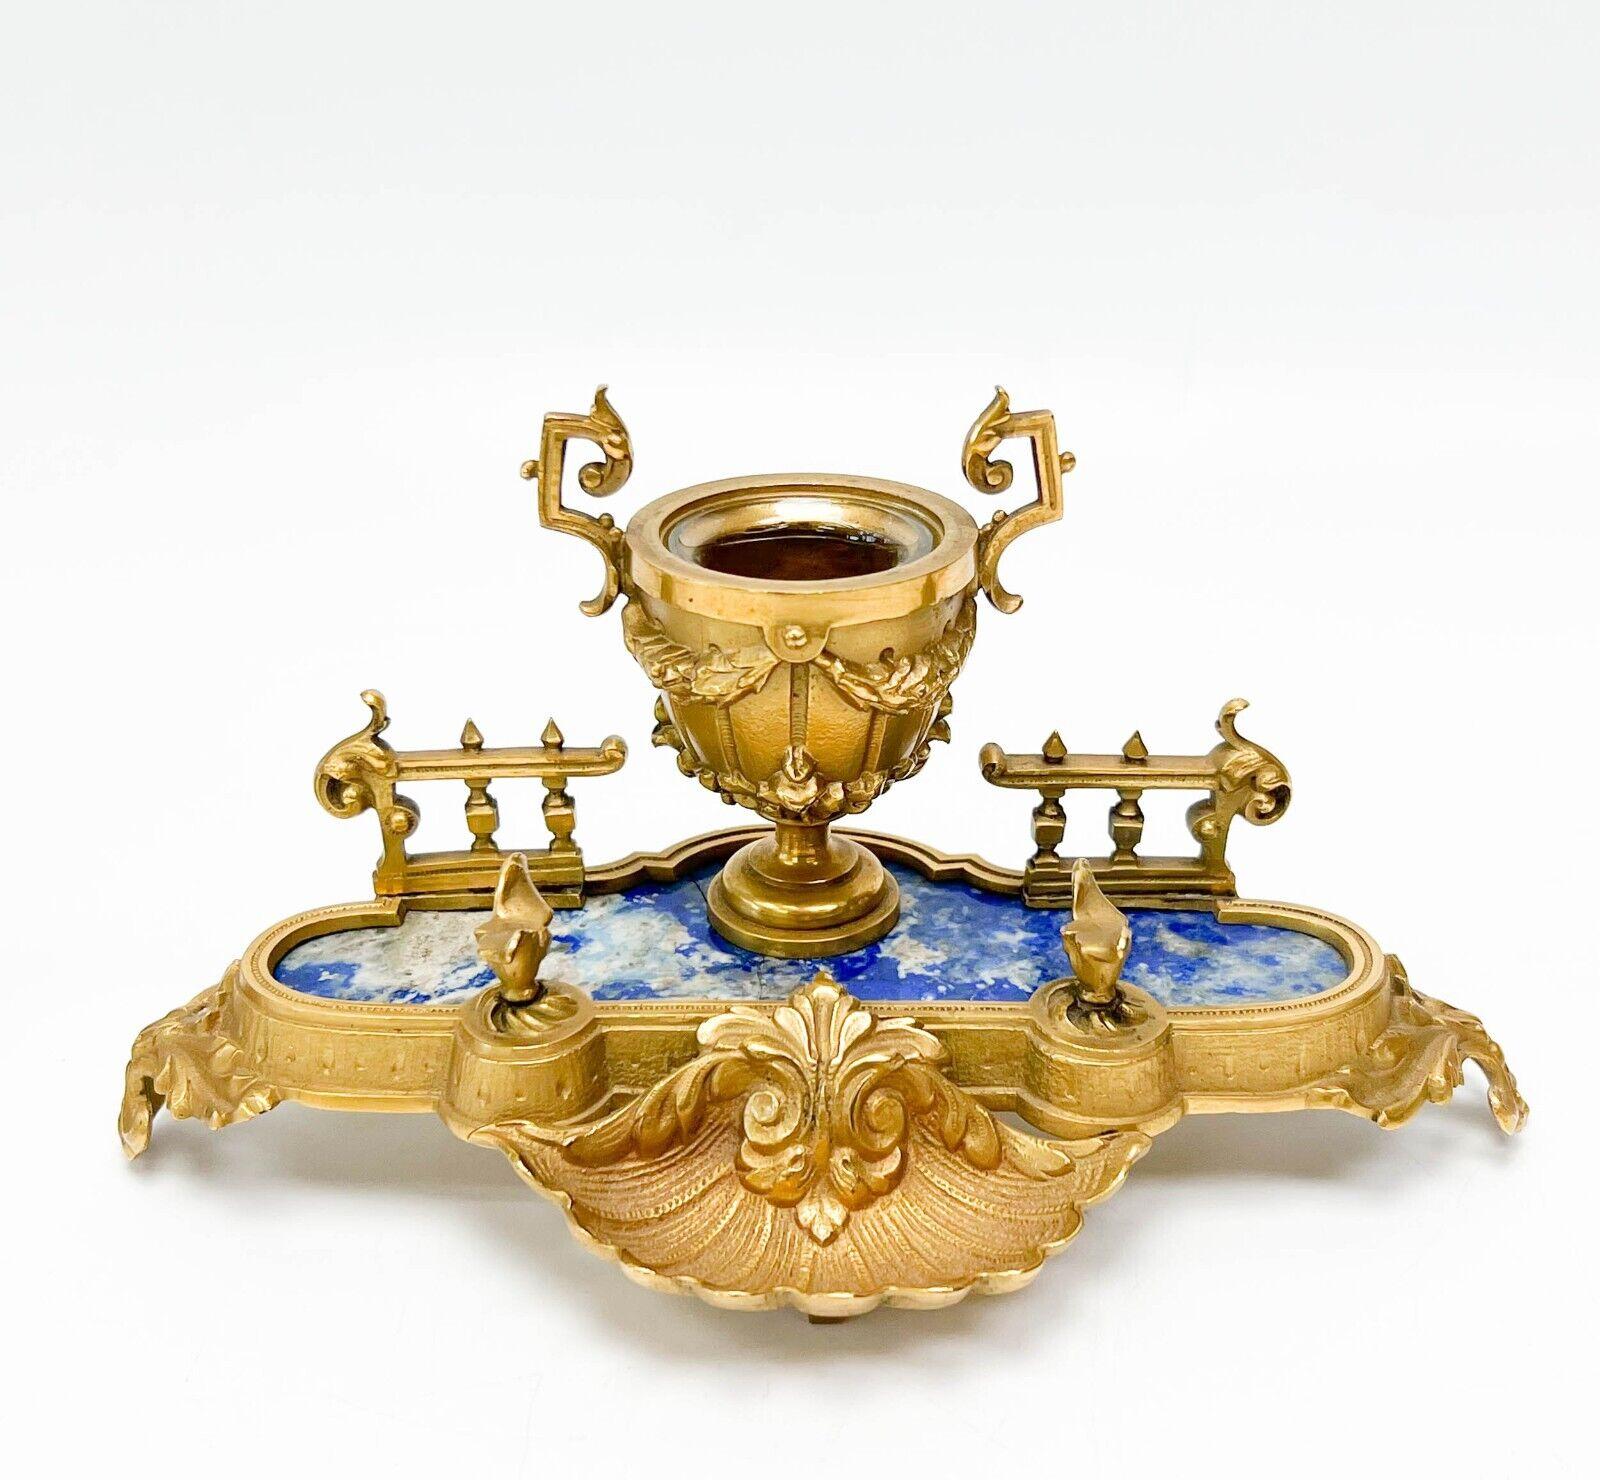  3 piece Continental desk garniture gilt bronze & lapis lazuli, possibly French, circa 1920. Main piece with inkwell with glass liner, pair chamber sticks. Gilt bronze mounts with foliate and shell decoration. Ink stand with inkwell, pen holder, nib